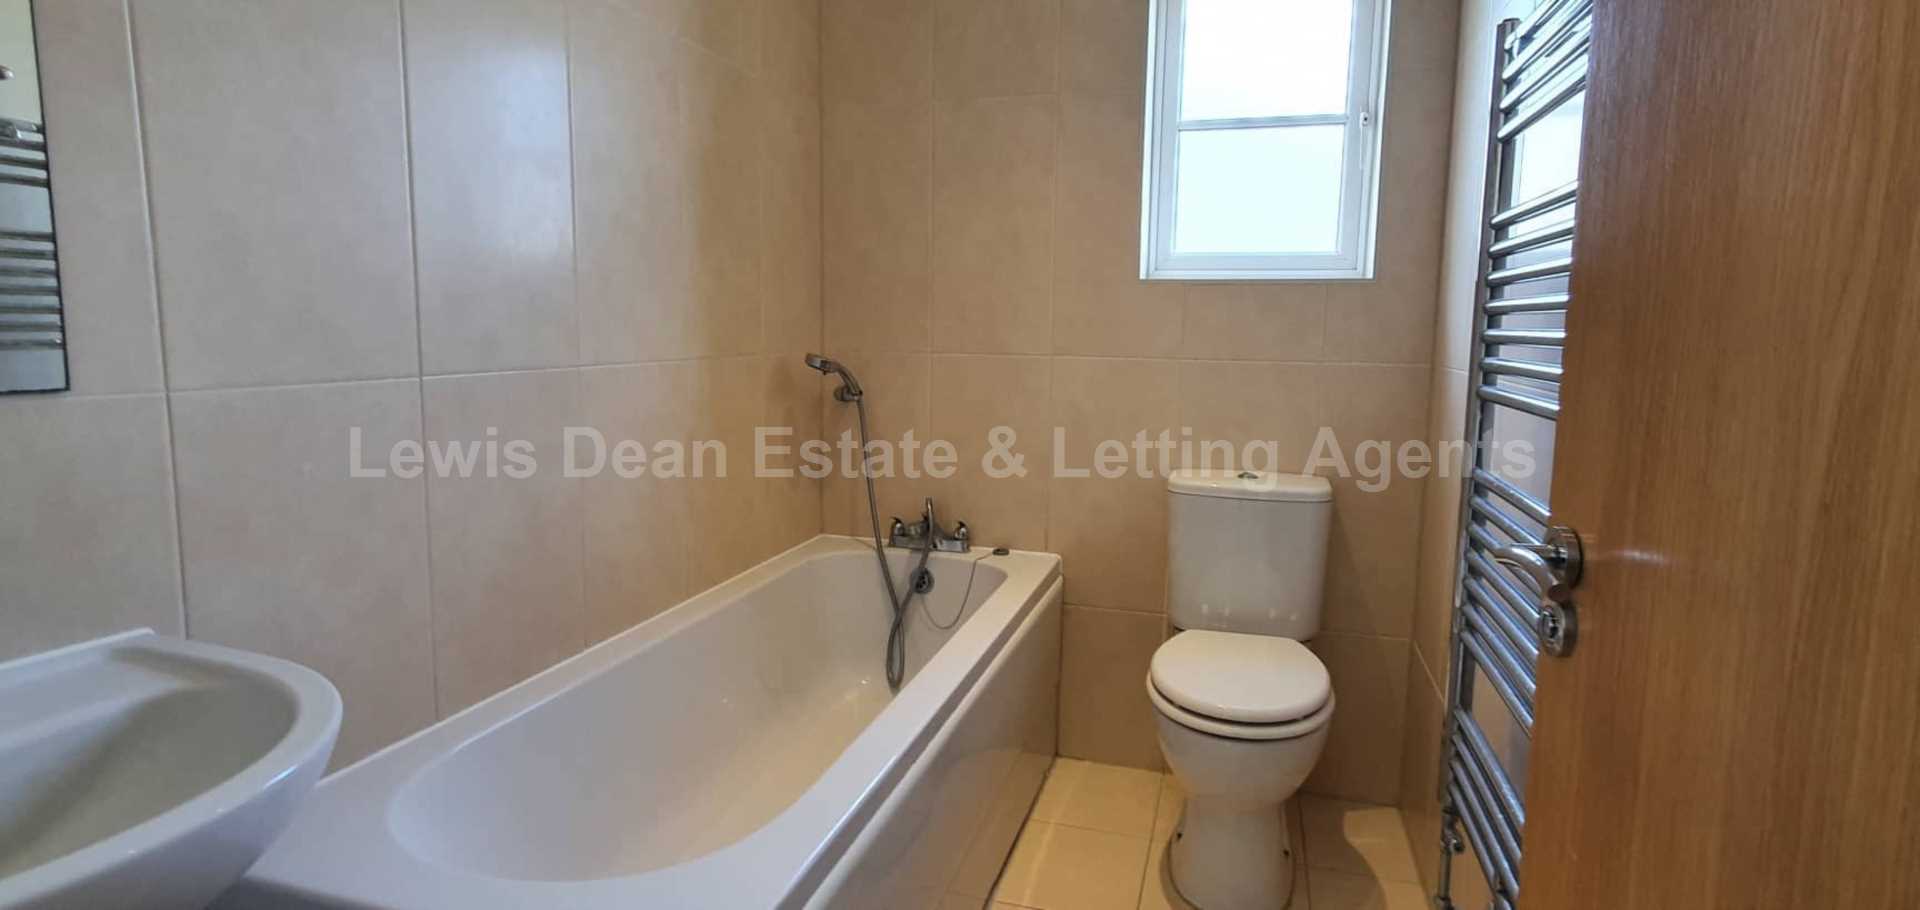 LET AGREED - SIMIALR REQUIRED IN Hamworthy, Poole, Dorset., Image 6